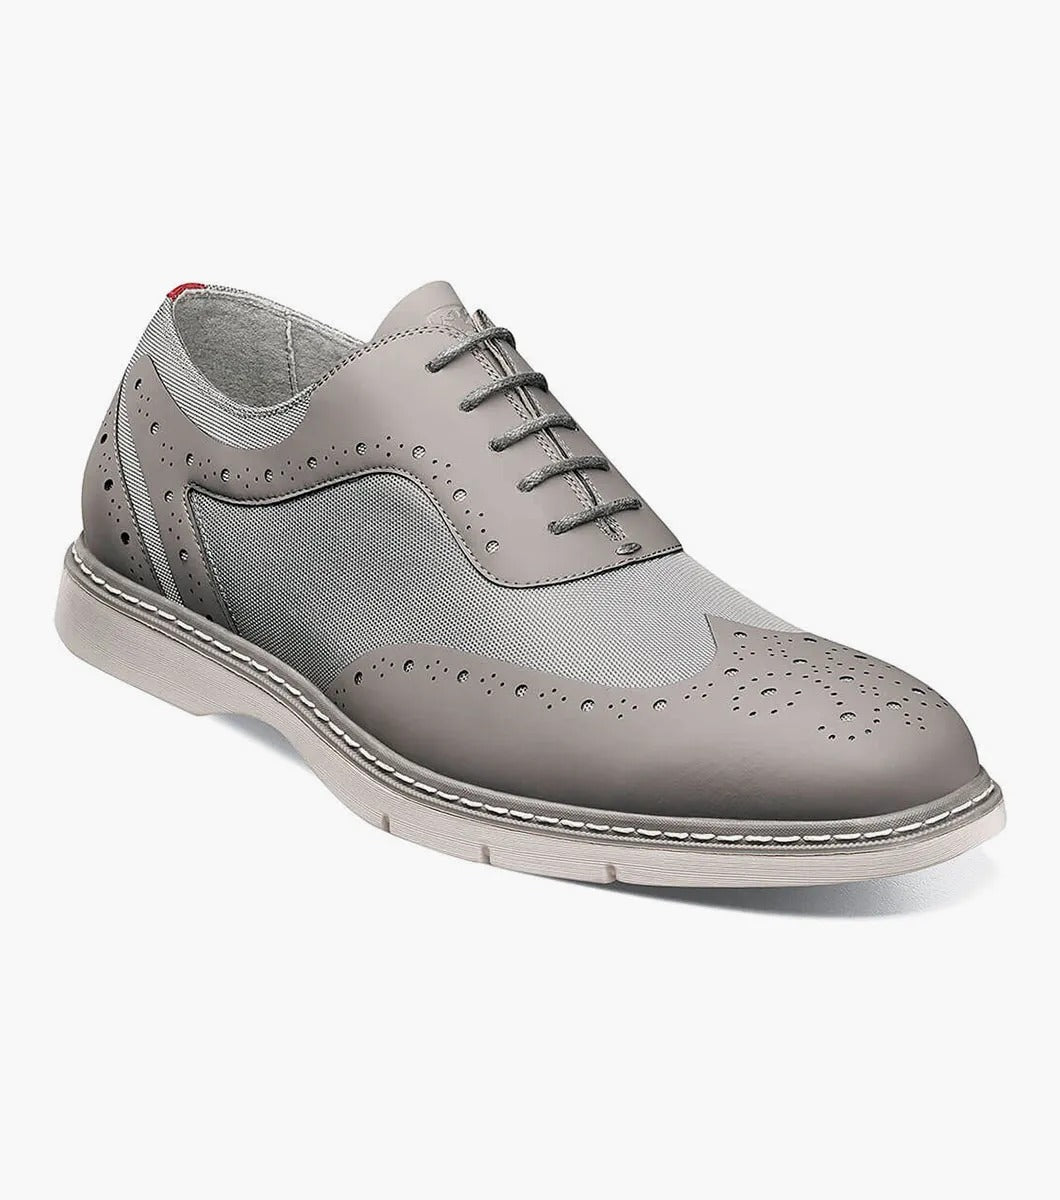 Stacy Adams - SUMMIT Wingtip Lace Up - Gray - 25434-020